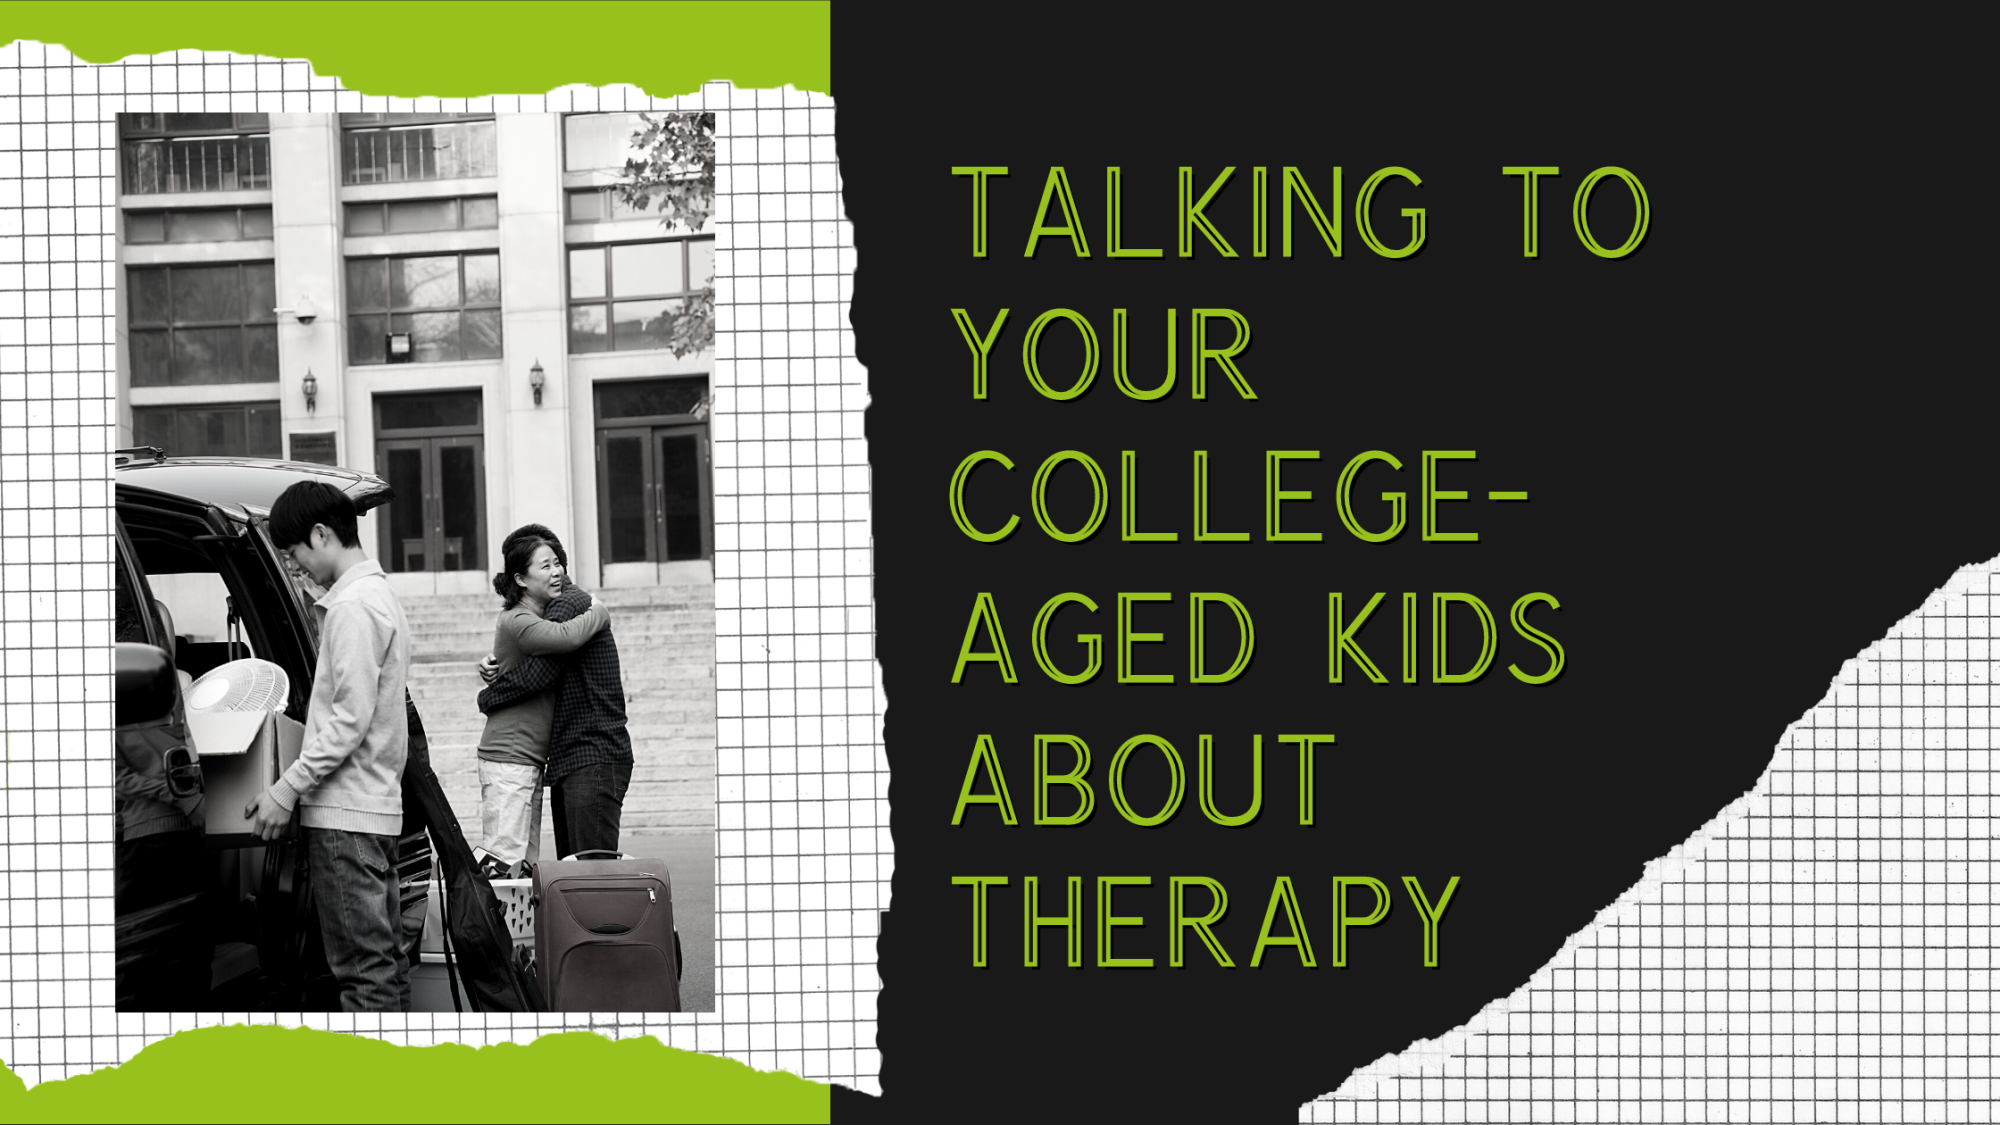 Talking to Your College-Aged Kids About Therapy